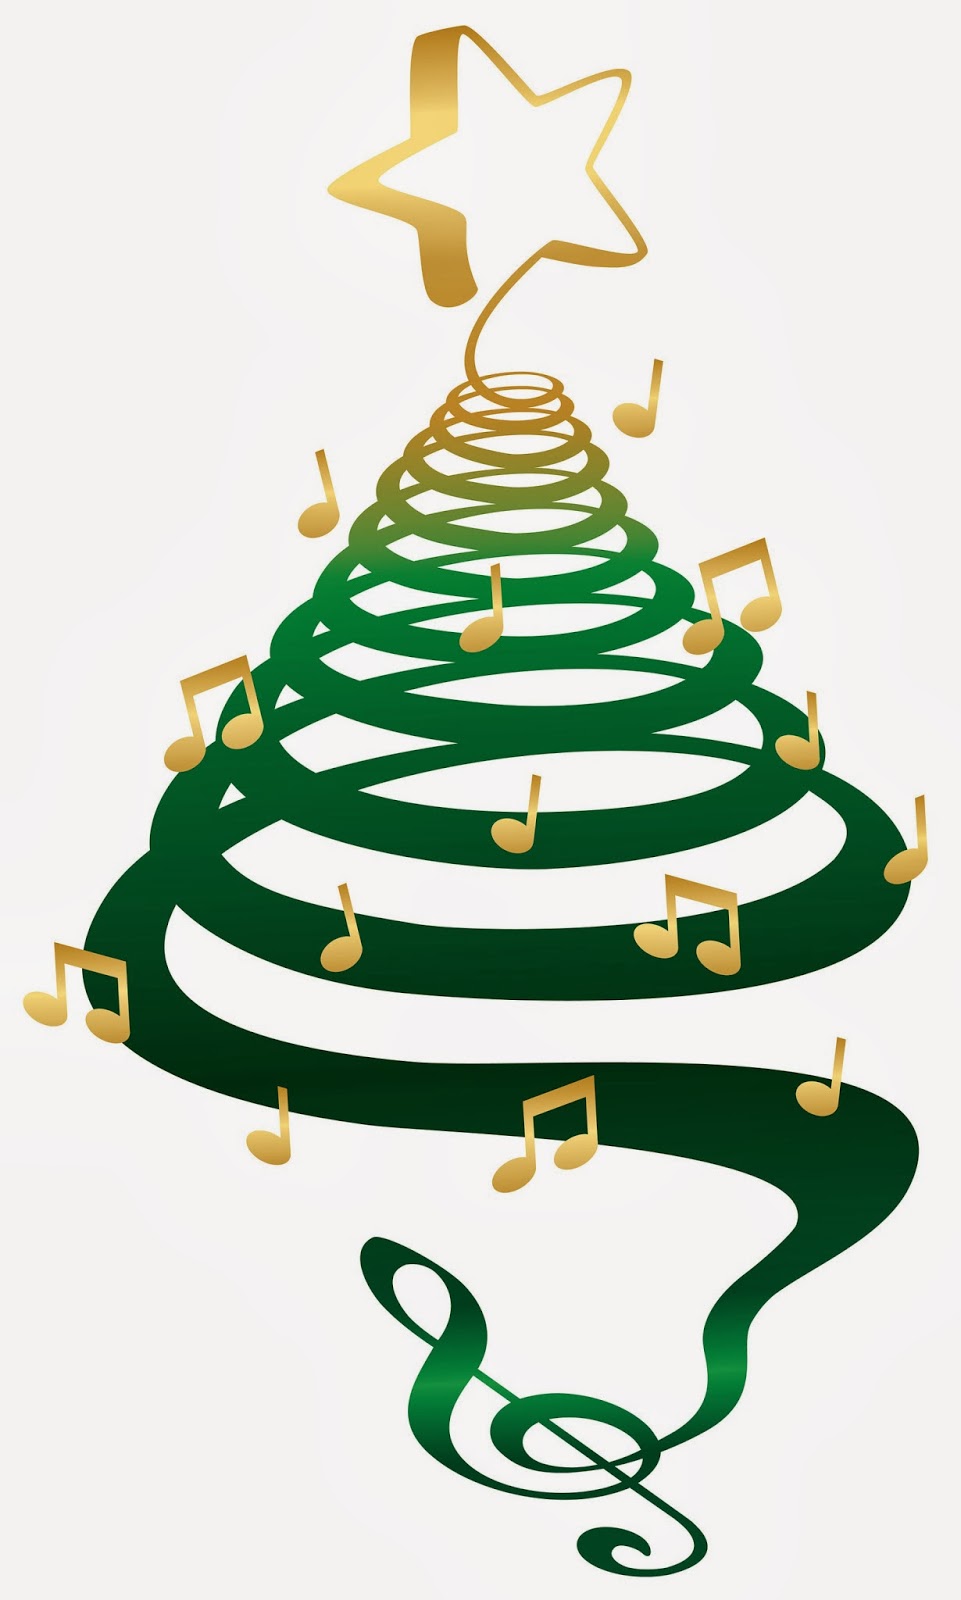 Download Free Christmas Music Notes Png Download Free Clip Art Free Clip Art On Clipart Library Yellowimages Mockups